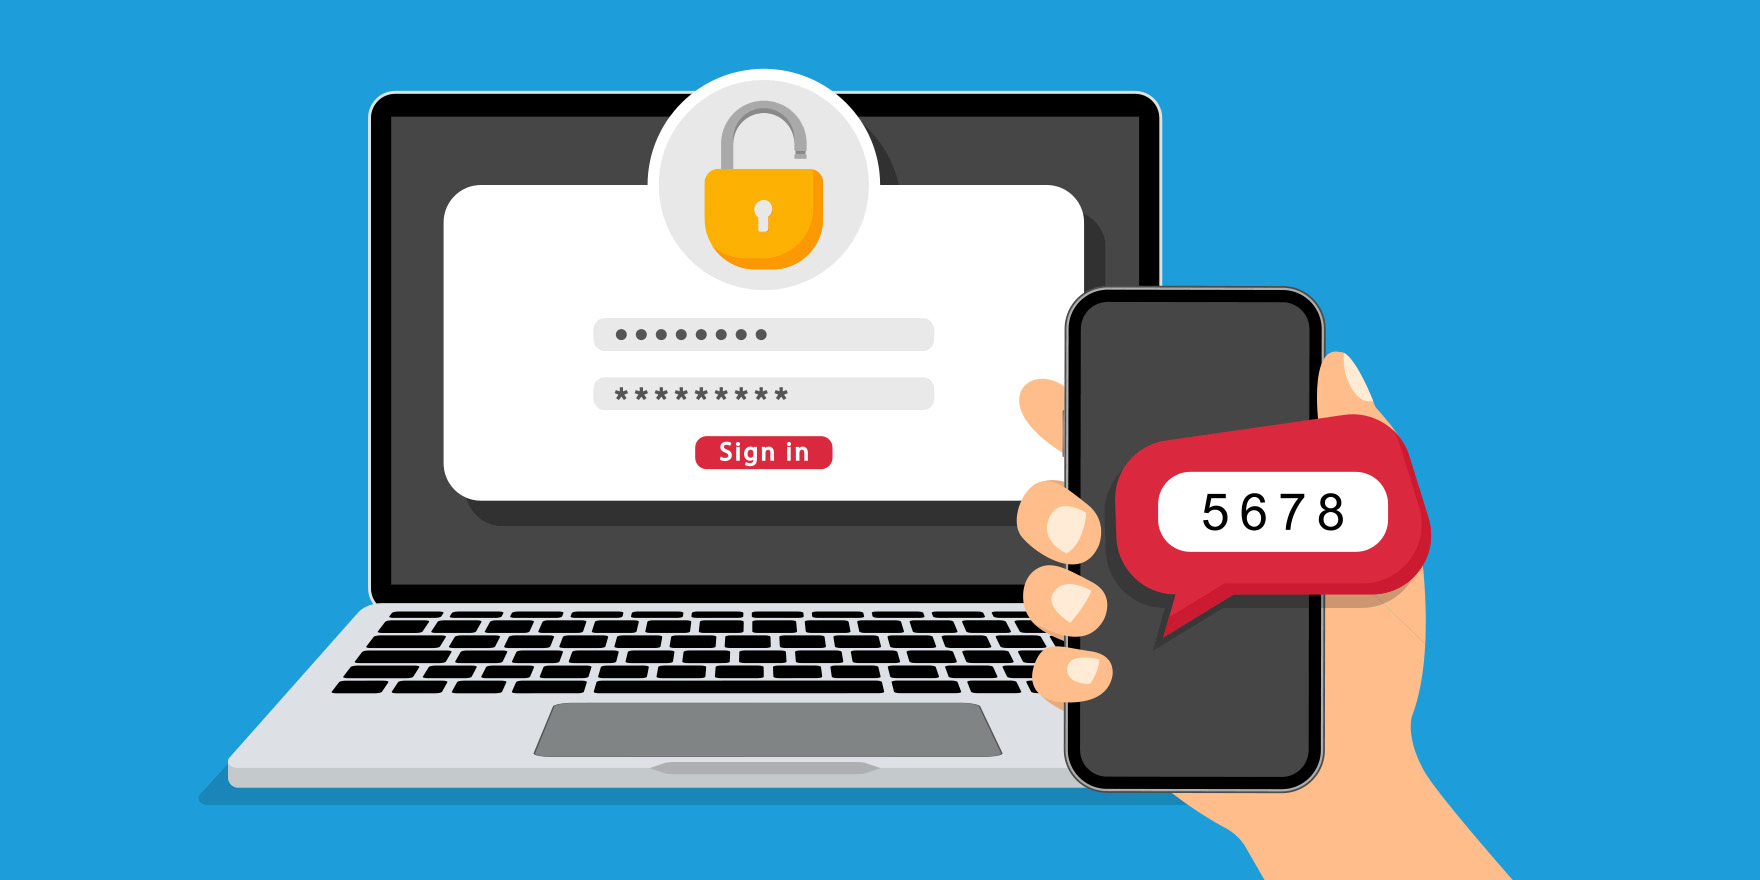 Improve your security with multi-factor authentication (MFA)